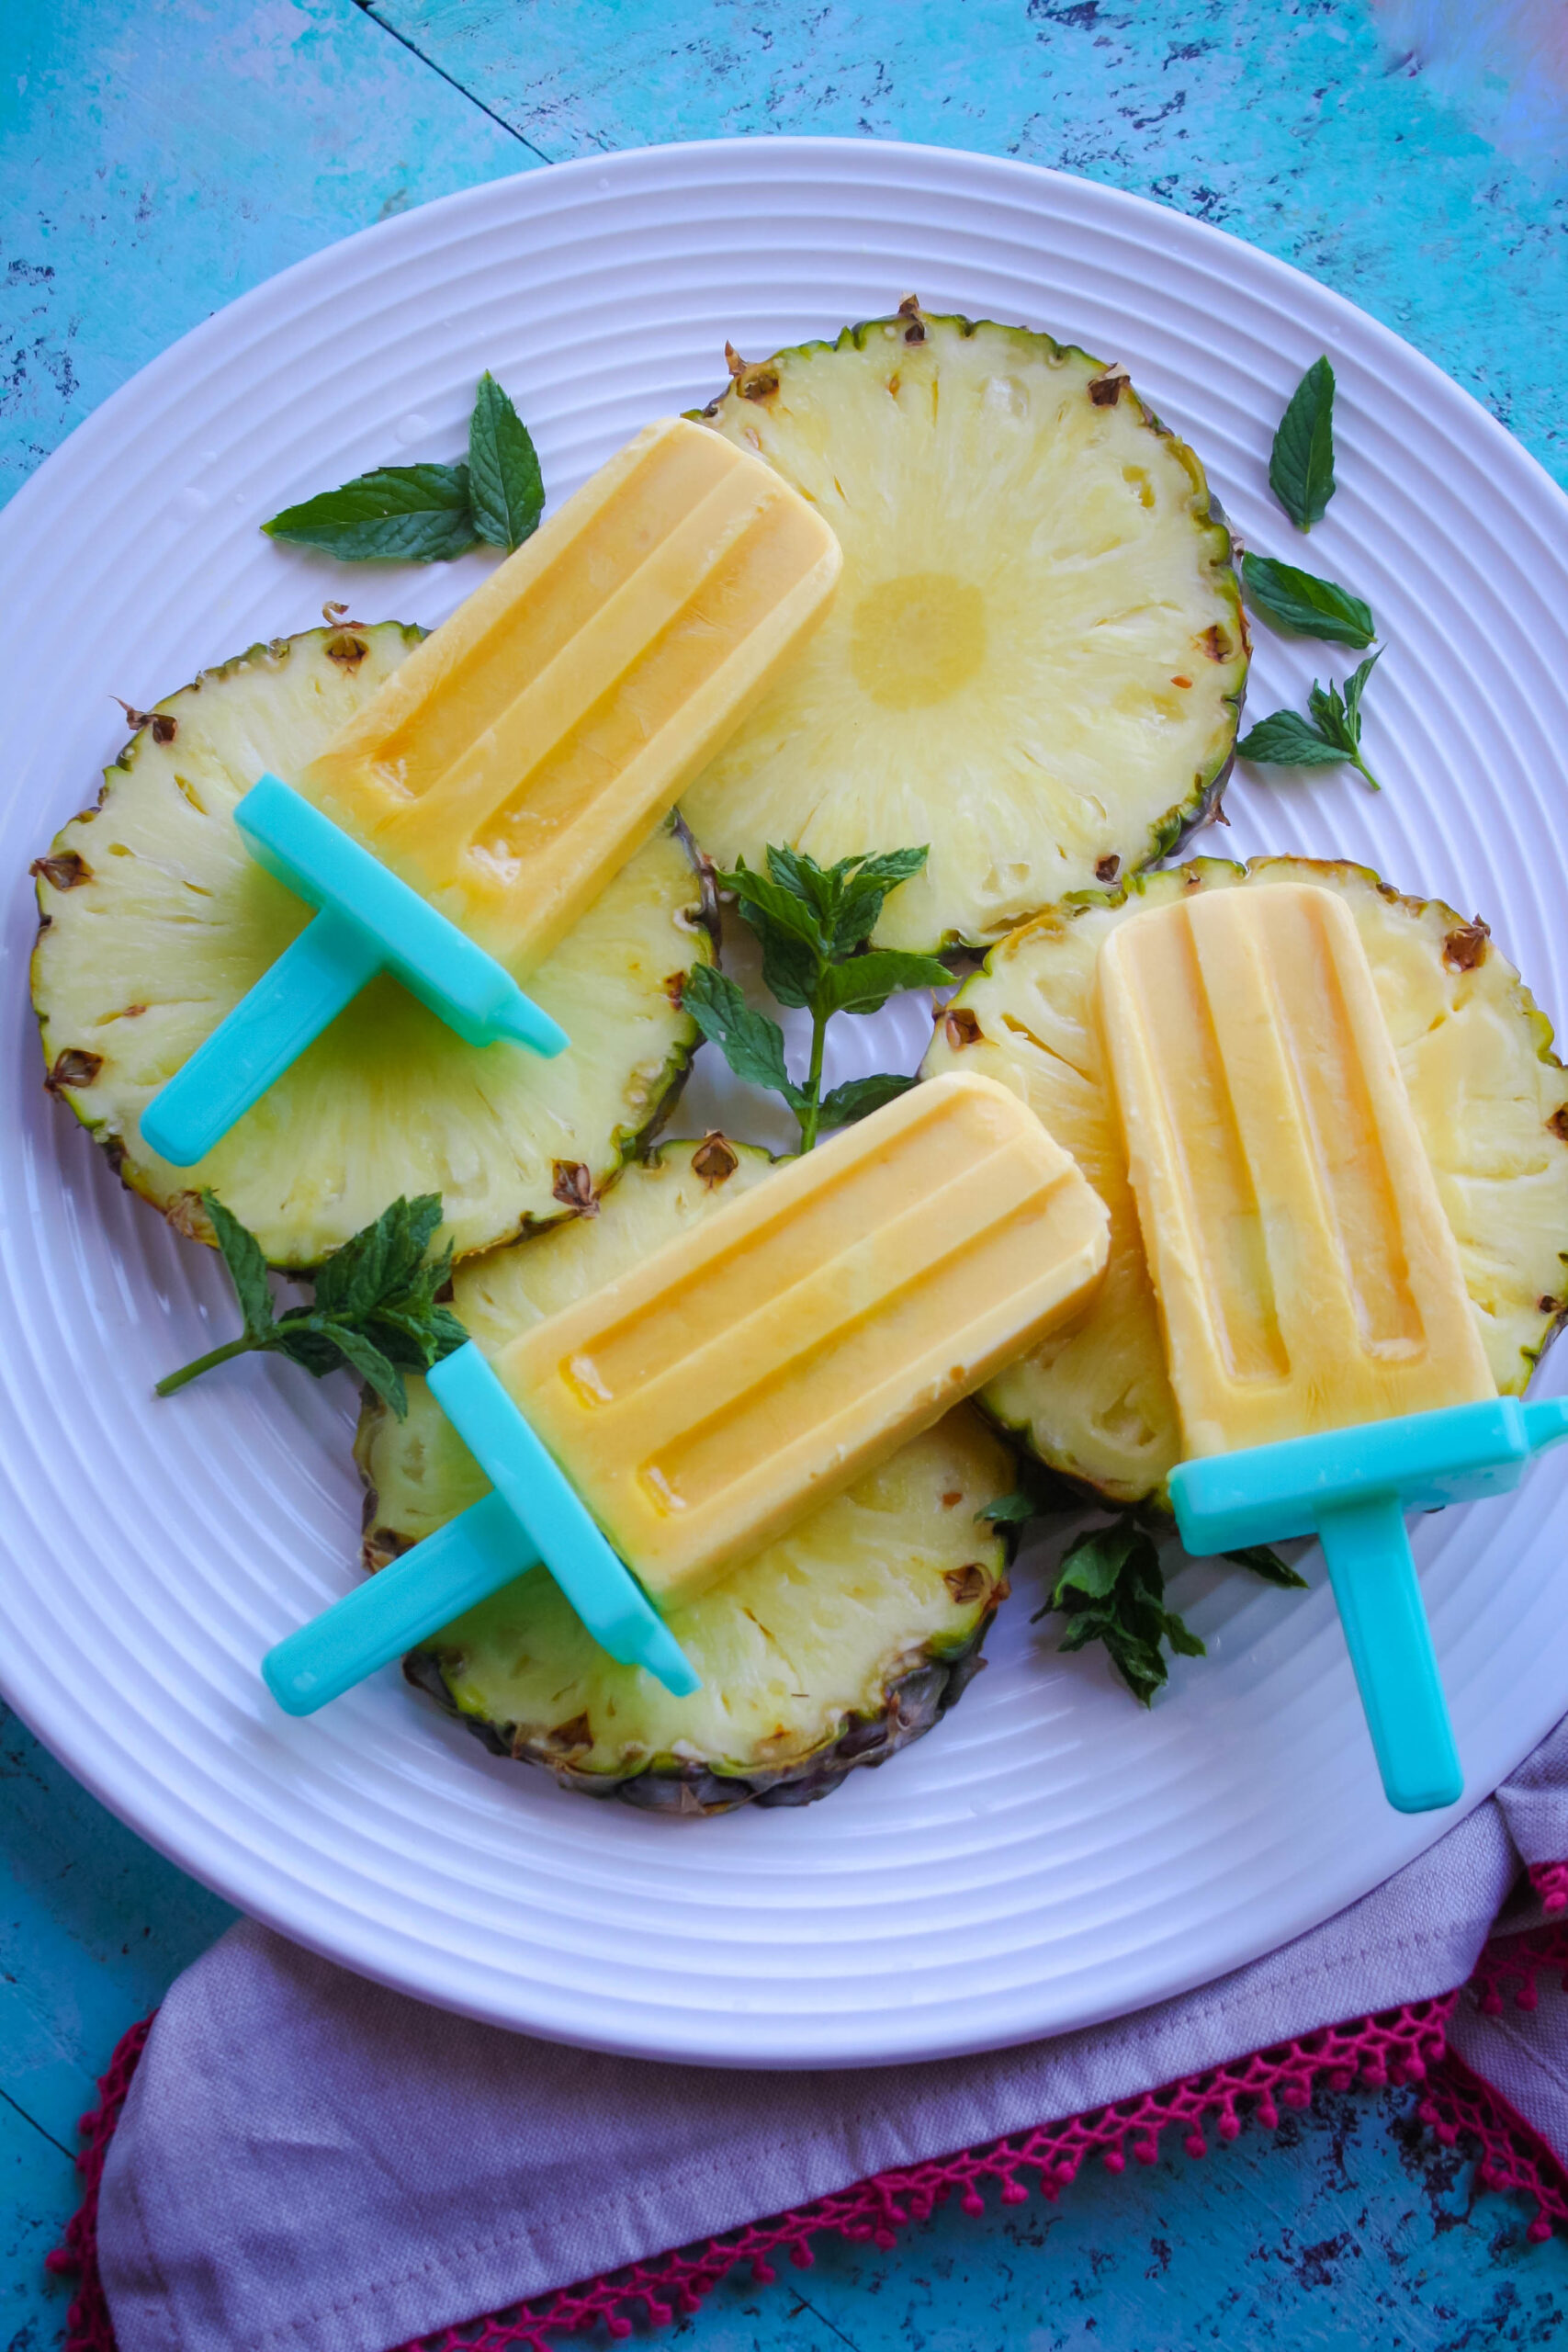 Mango-Pineapple Creamsicles are so yummy and perfect for the summer.